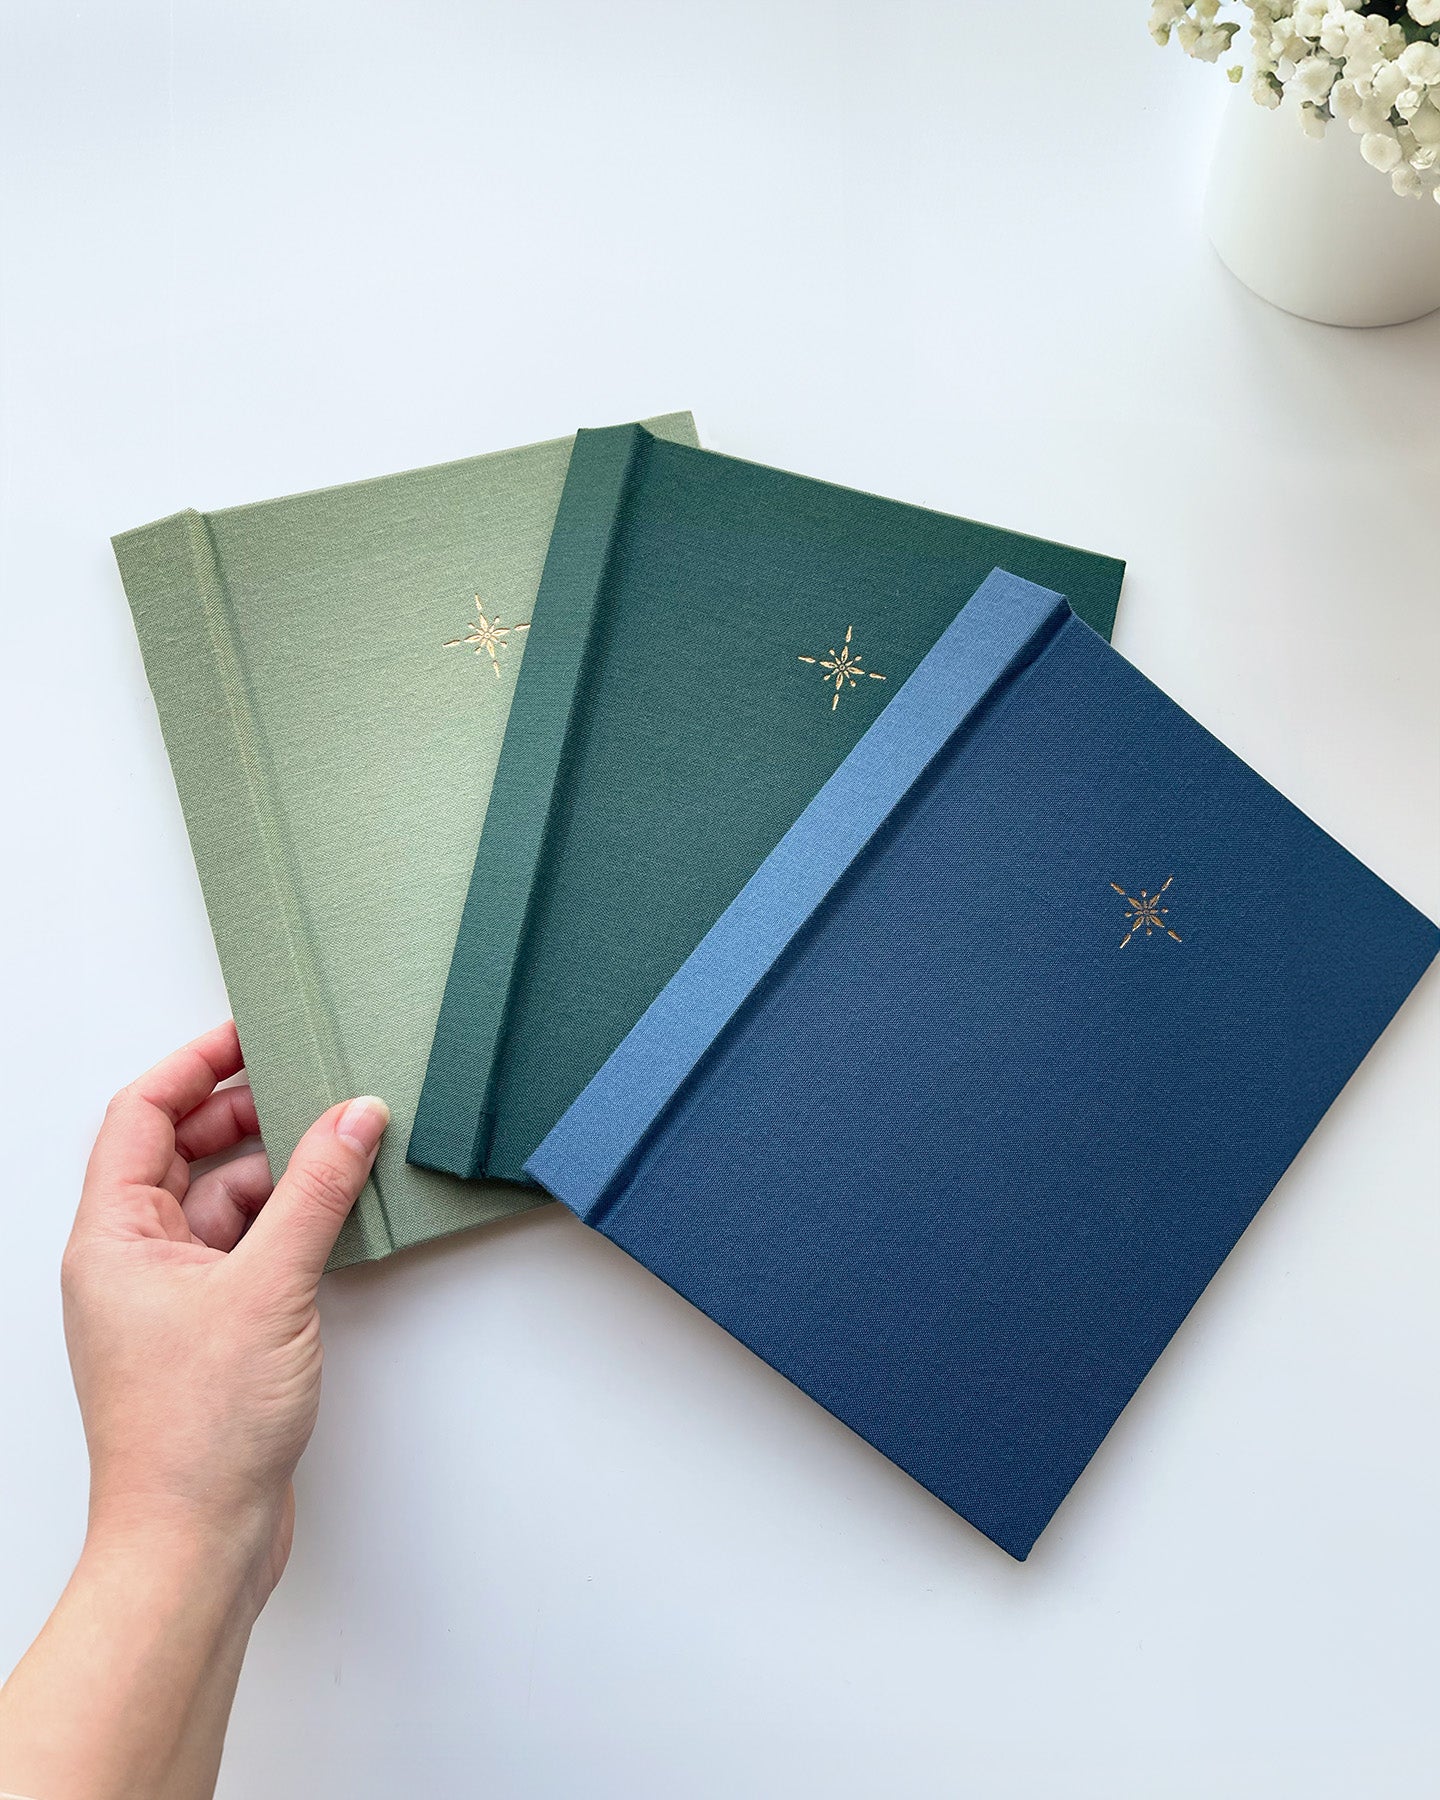 Luminé Dotted Notebook